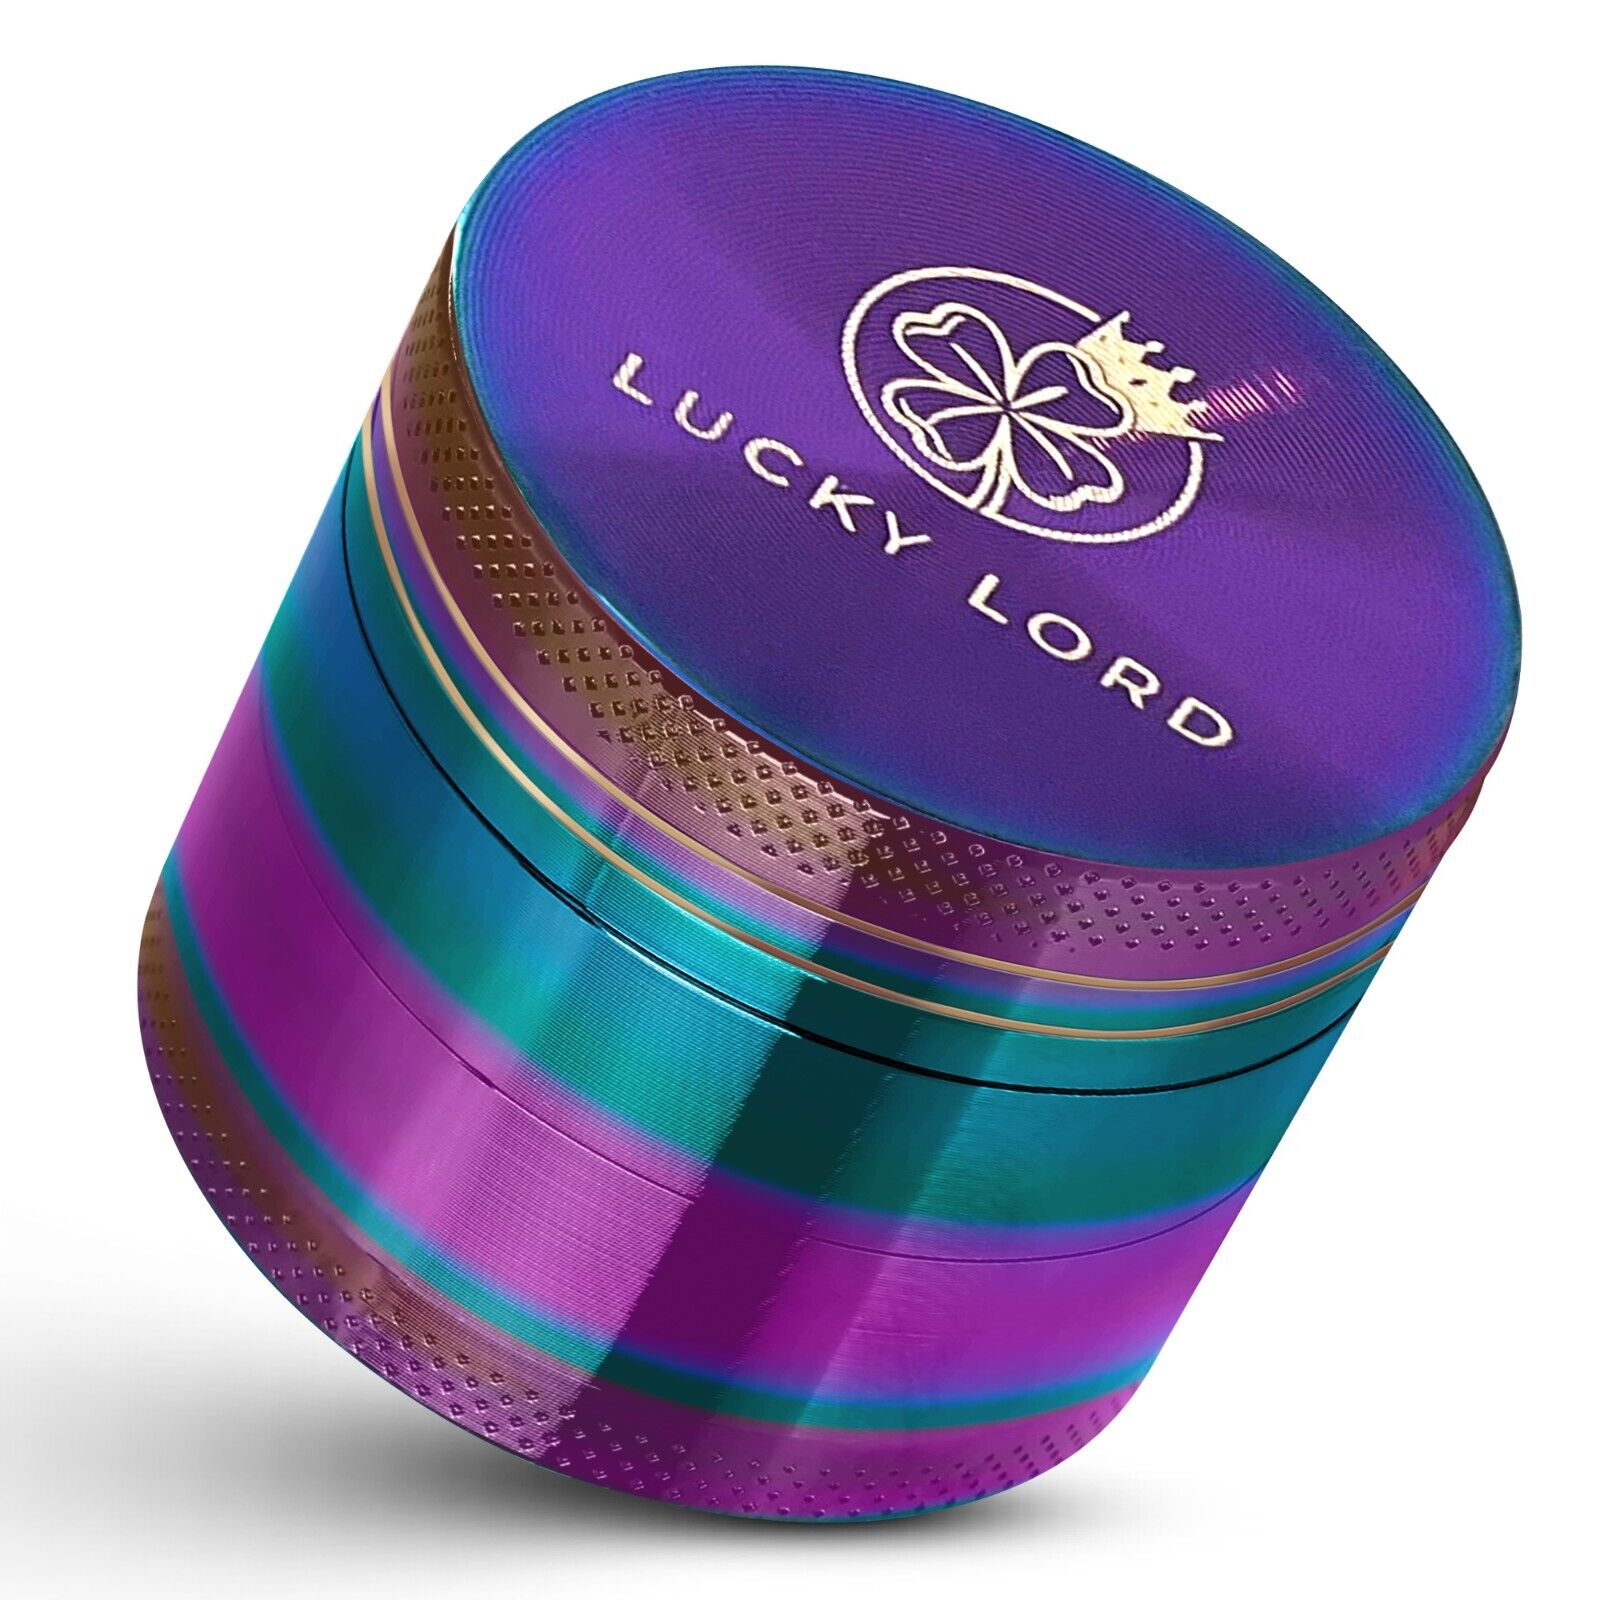 Lucky Lord Spice Herb Tobacco Grinder 2.5 Inch 4 Piece Crusher Aluminum Grinder